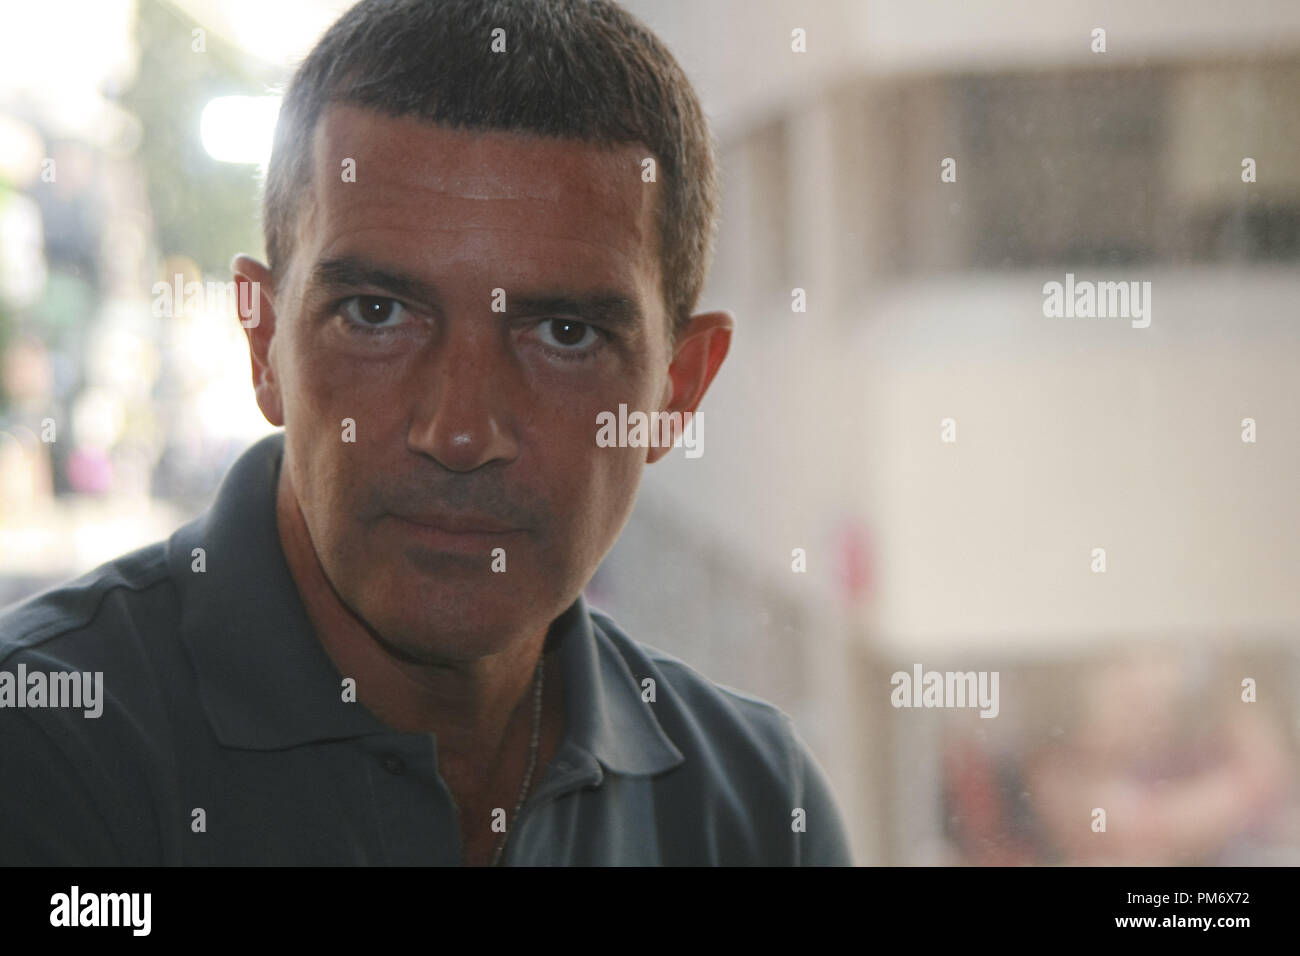 Antonio Banderas 'The Skin I Live In'  Portrait Session, September 12, 2011.  Reproduction by American tabloids is absolutely forbidden. File Reference # 31182 020JRC  For Editorial Use Only -  All Rights Reserved Stock Photo